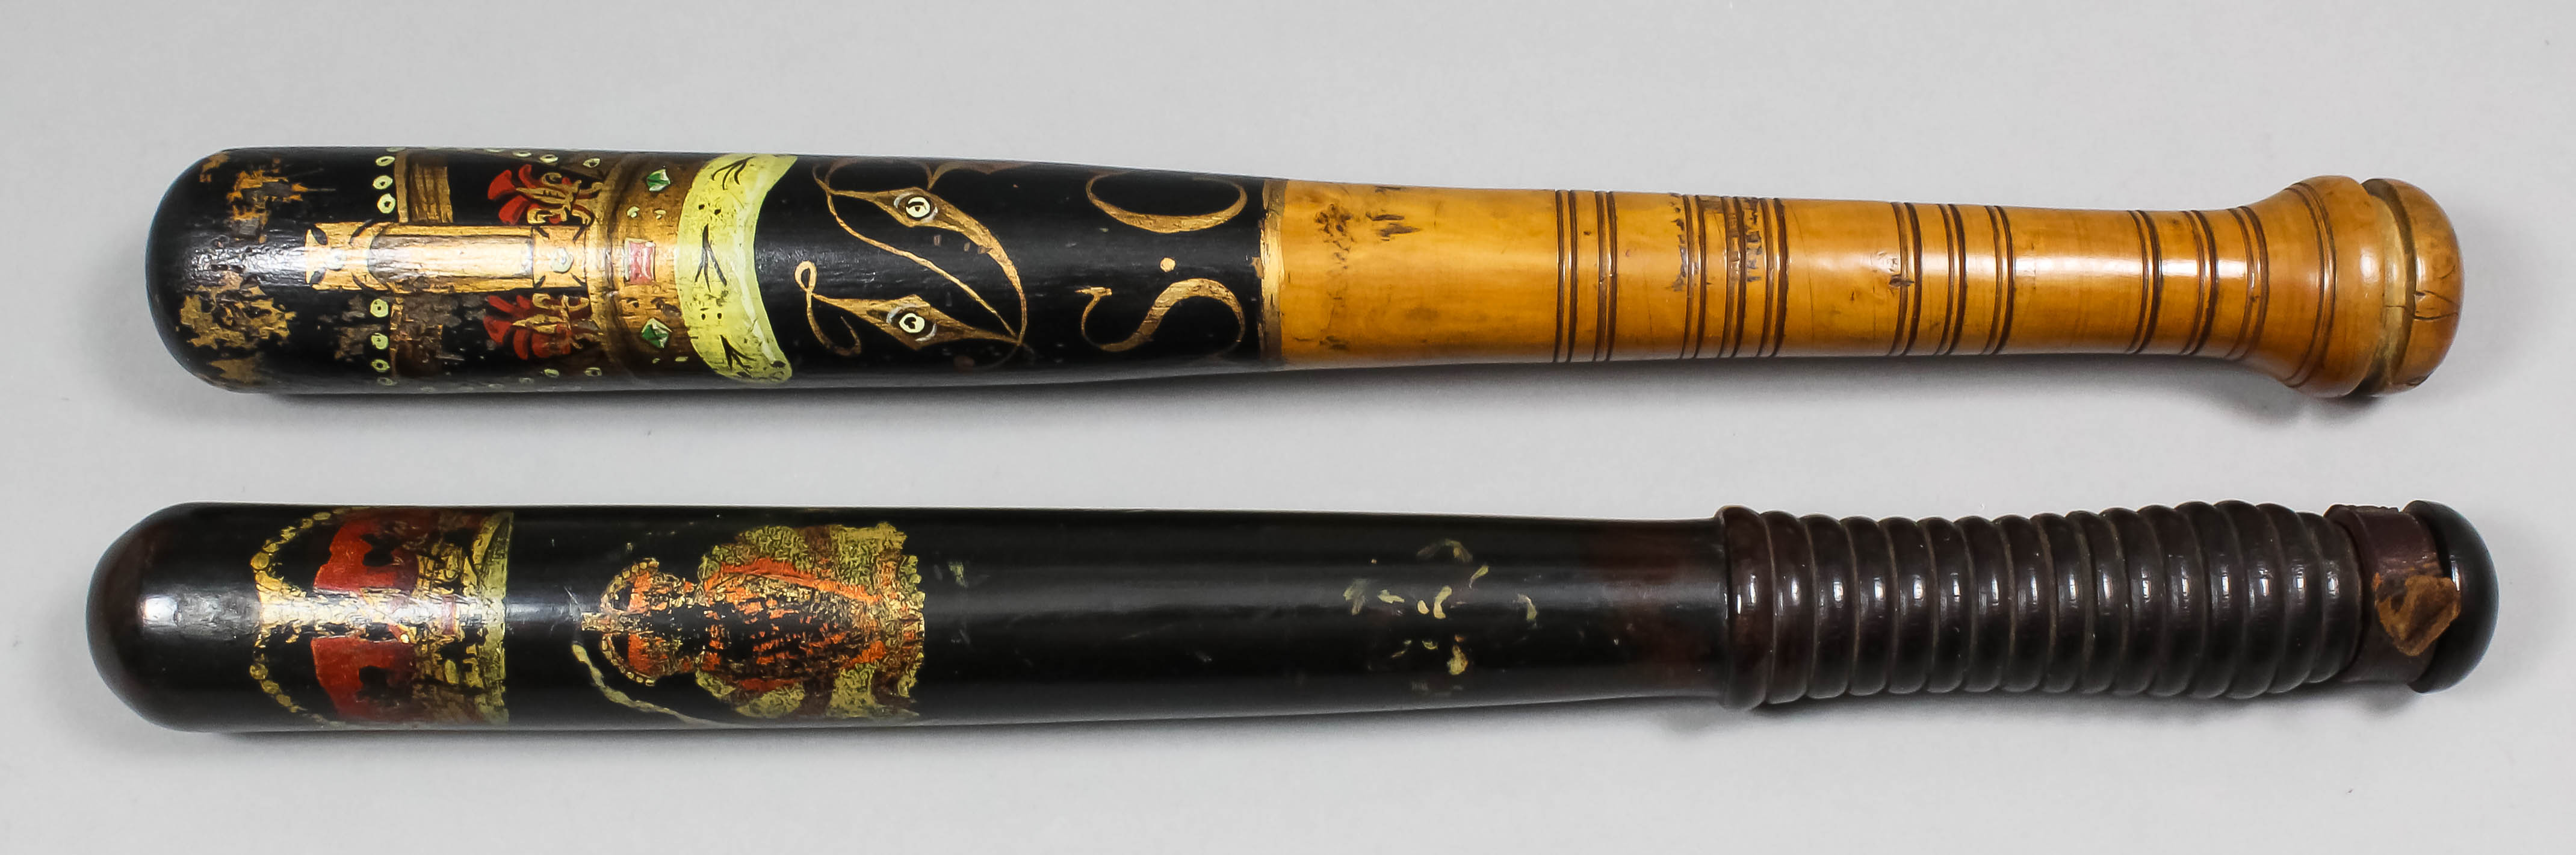 A Victorian turned wood truncheon painted with a crown over the royal cipher above "S.C." and "